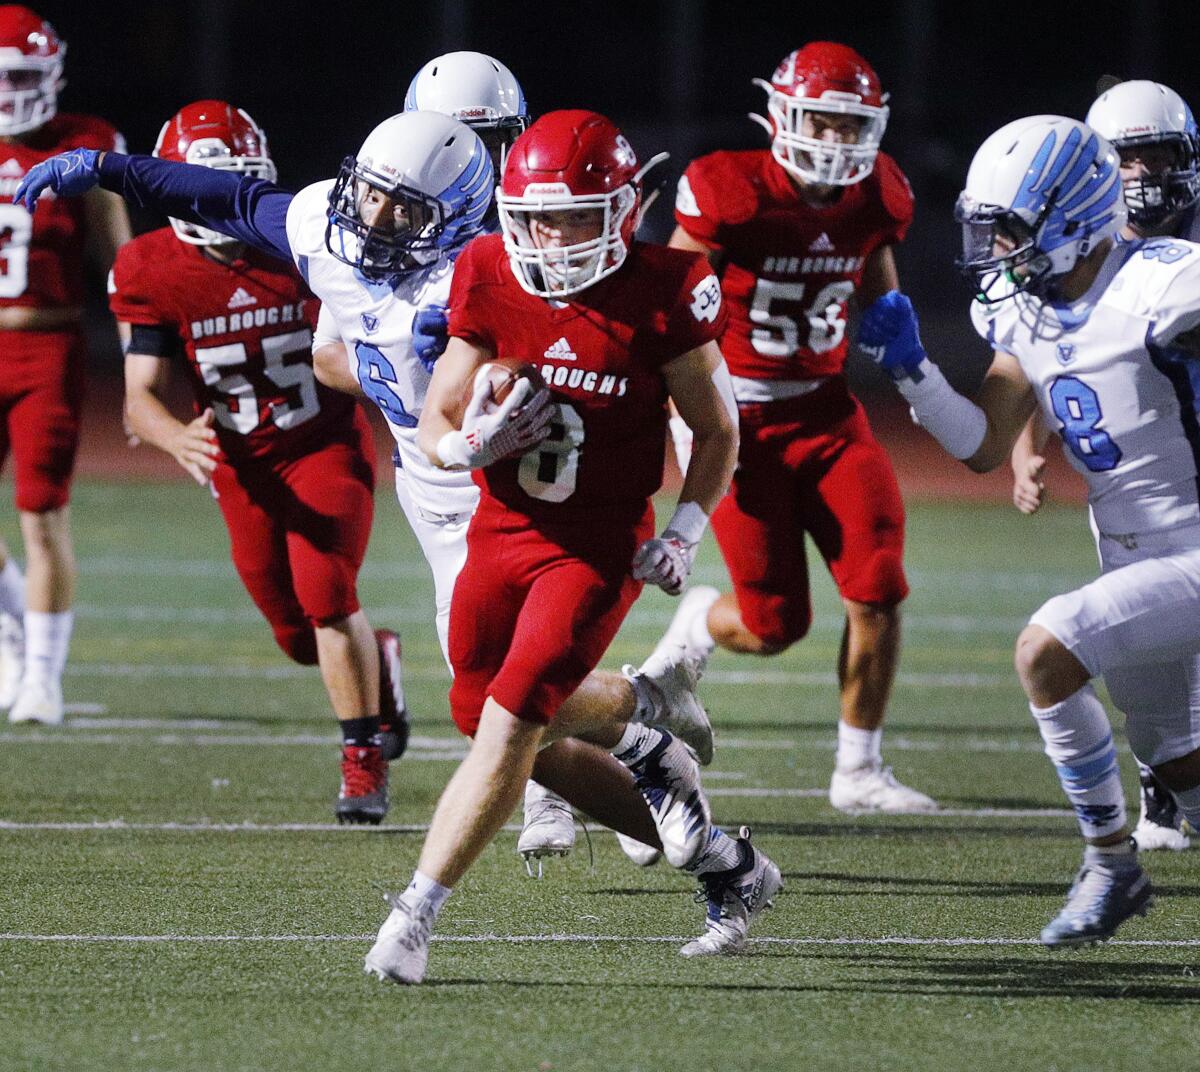 Burroughs' Jon English runs with the ball against Crescenta Valley in a Pacific League football game at Memorial Field in Burbank on Tuesday, September 27, 2019.